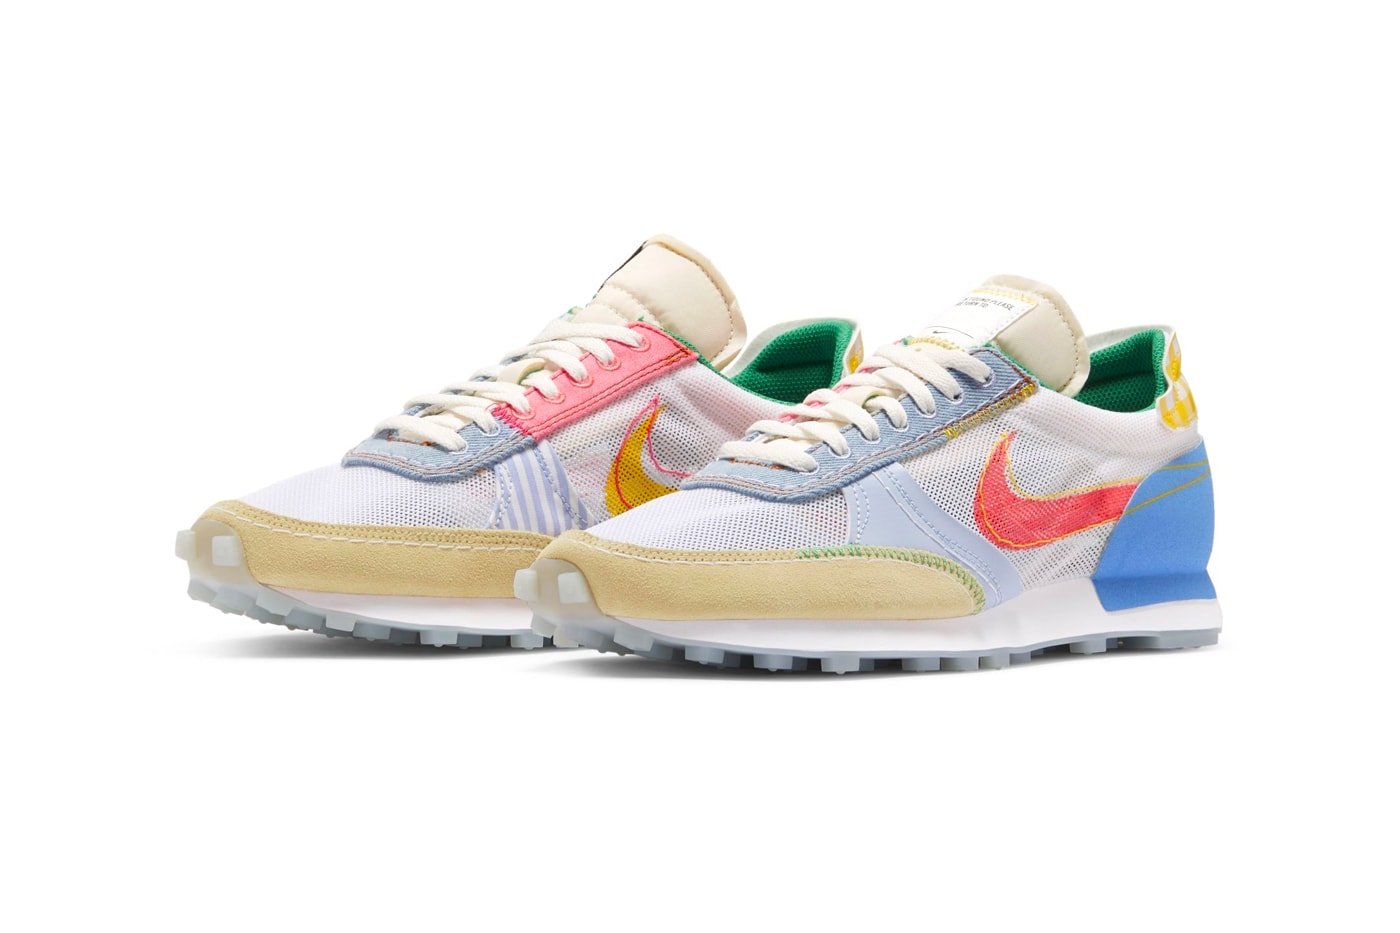 Nike Daybreak Type What The Release Info cz8654 164 menswear streetwear shoes sneakers kicks runners spring summer 2020 collection